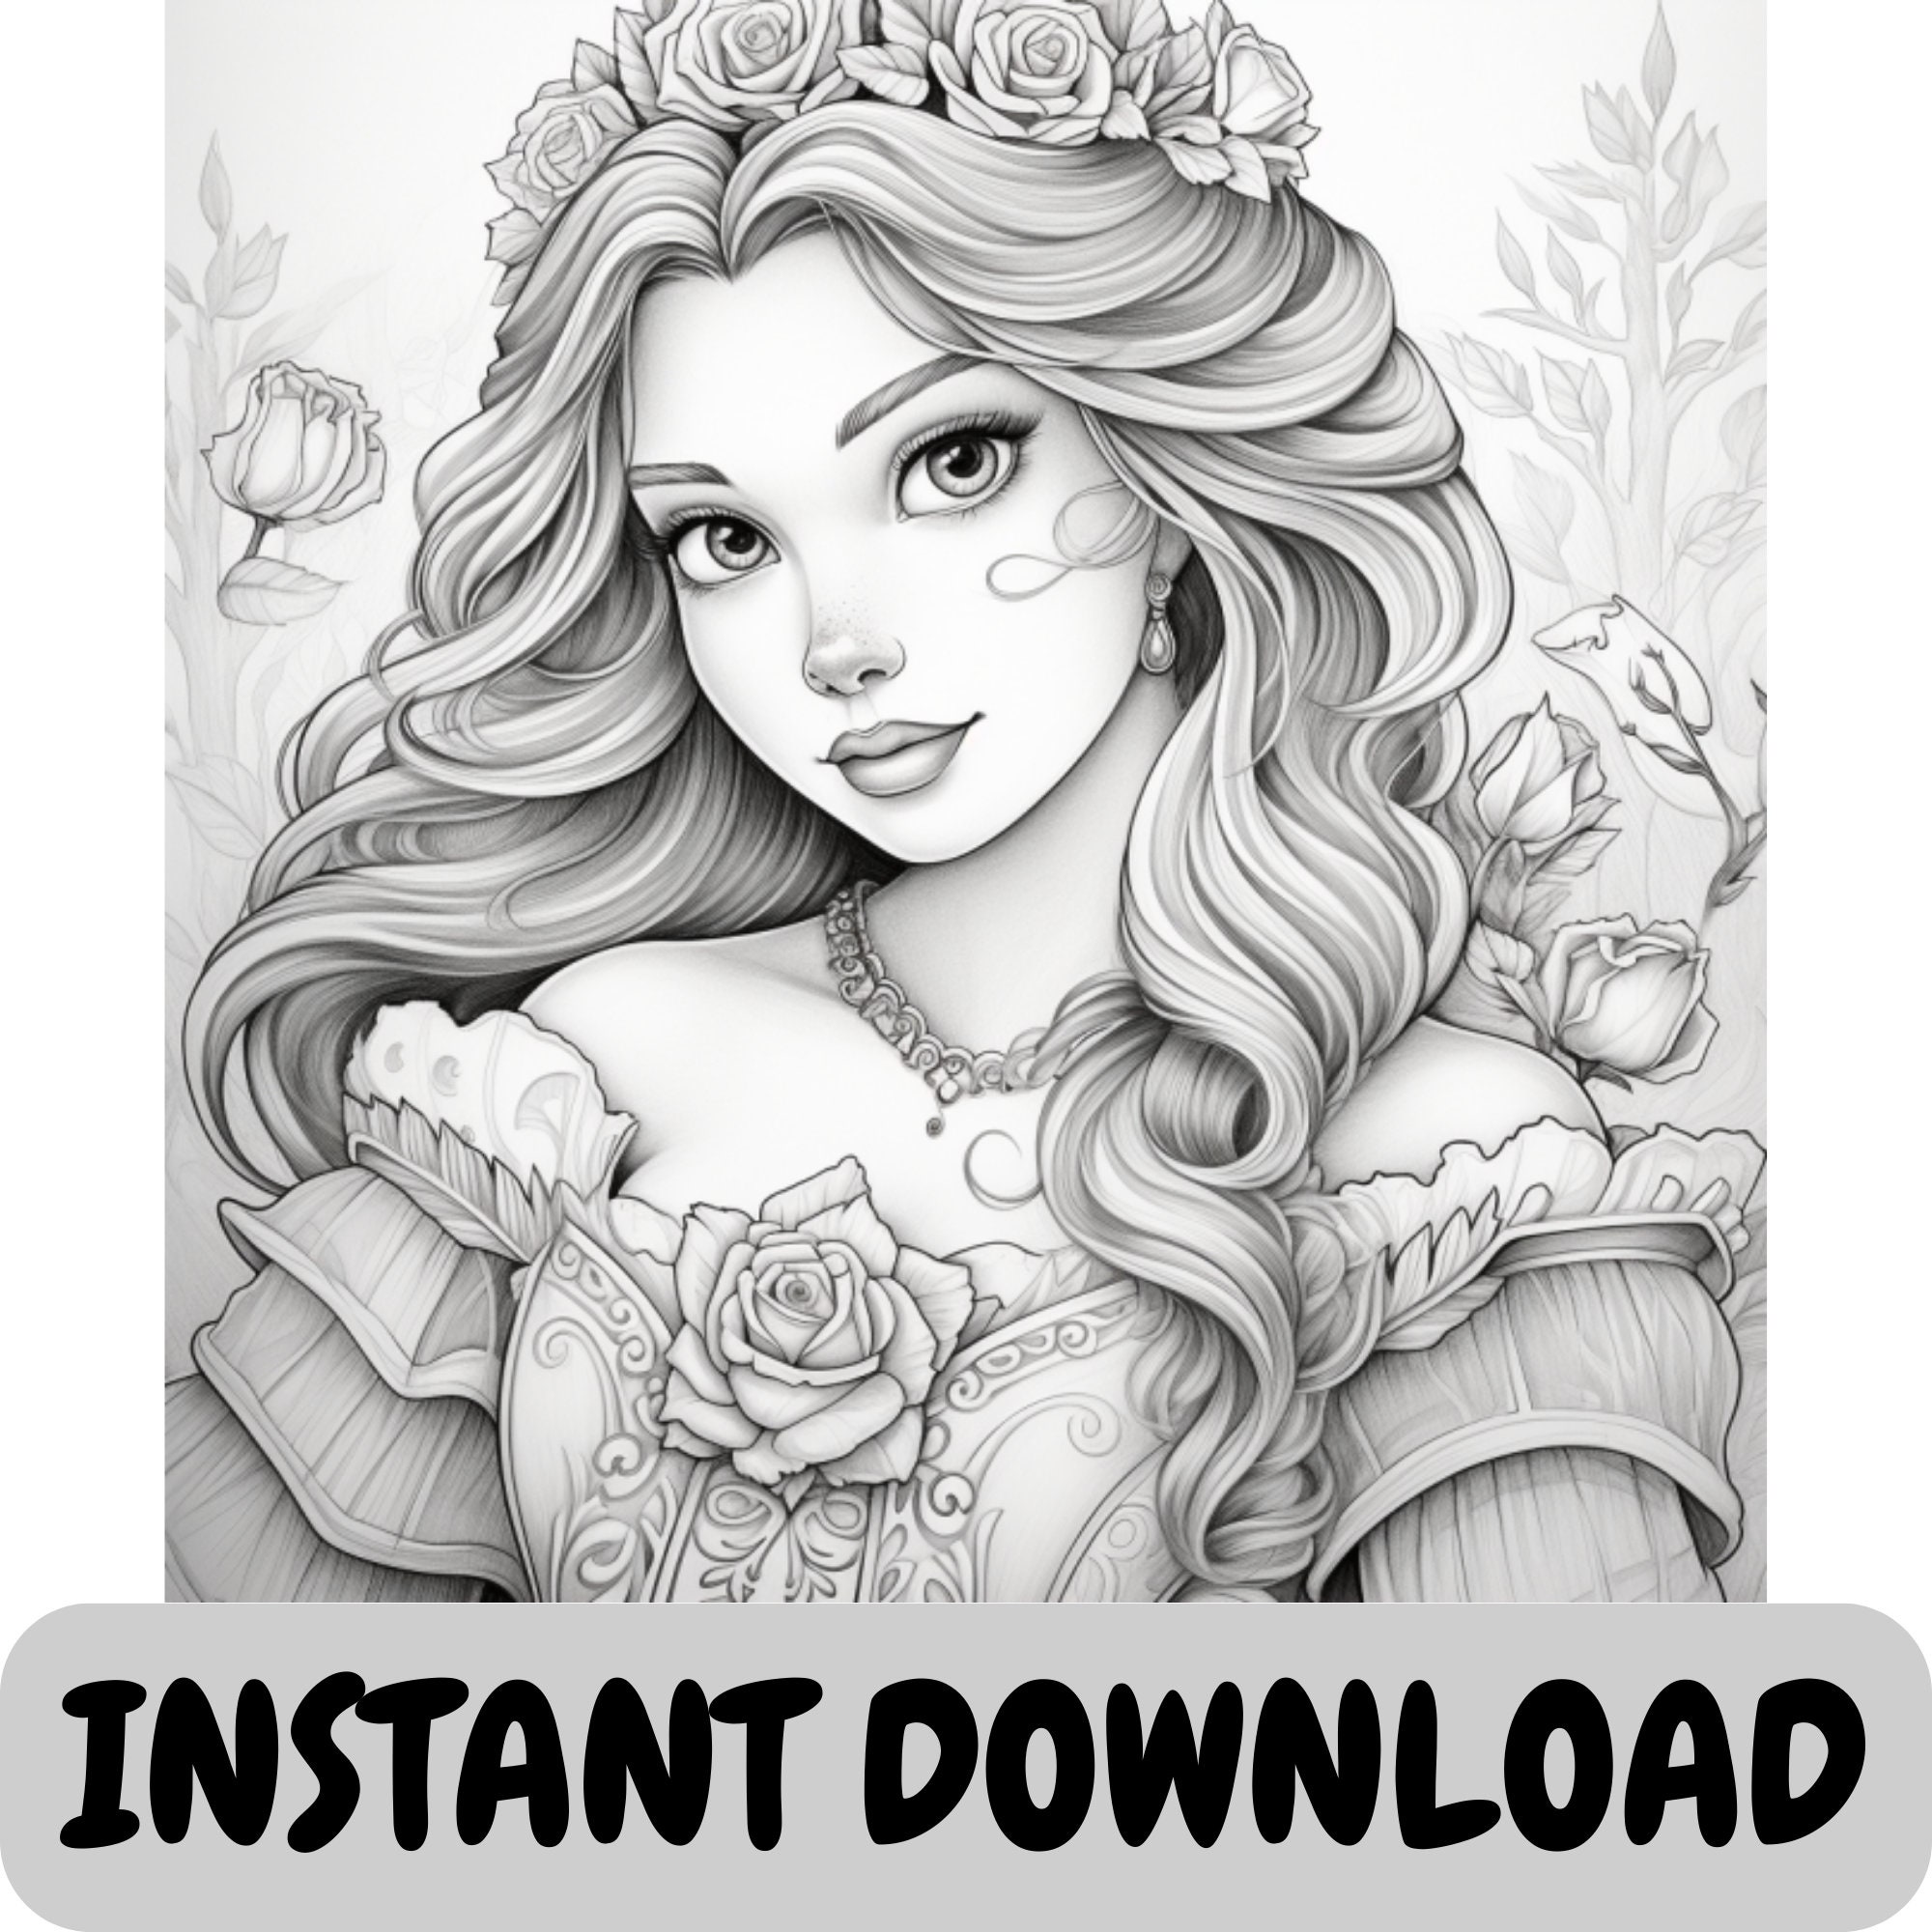 40 Princess Coloring Pages, Printable Coloring Page With Princess